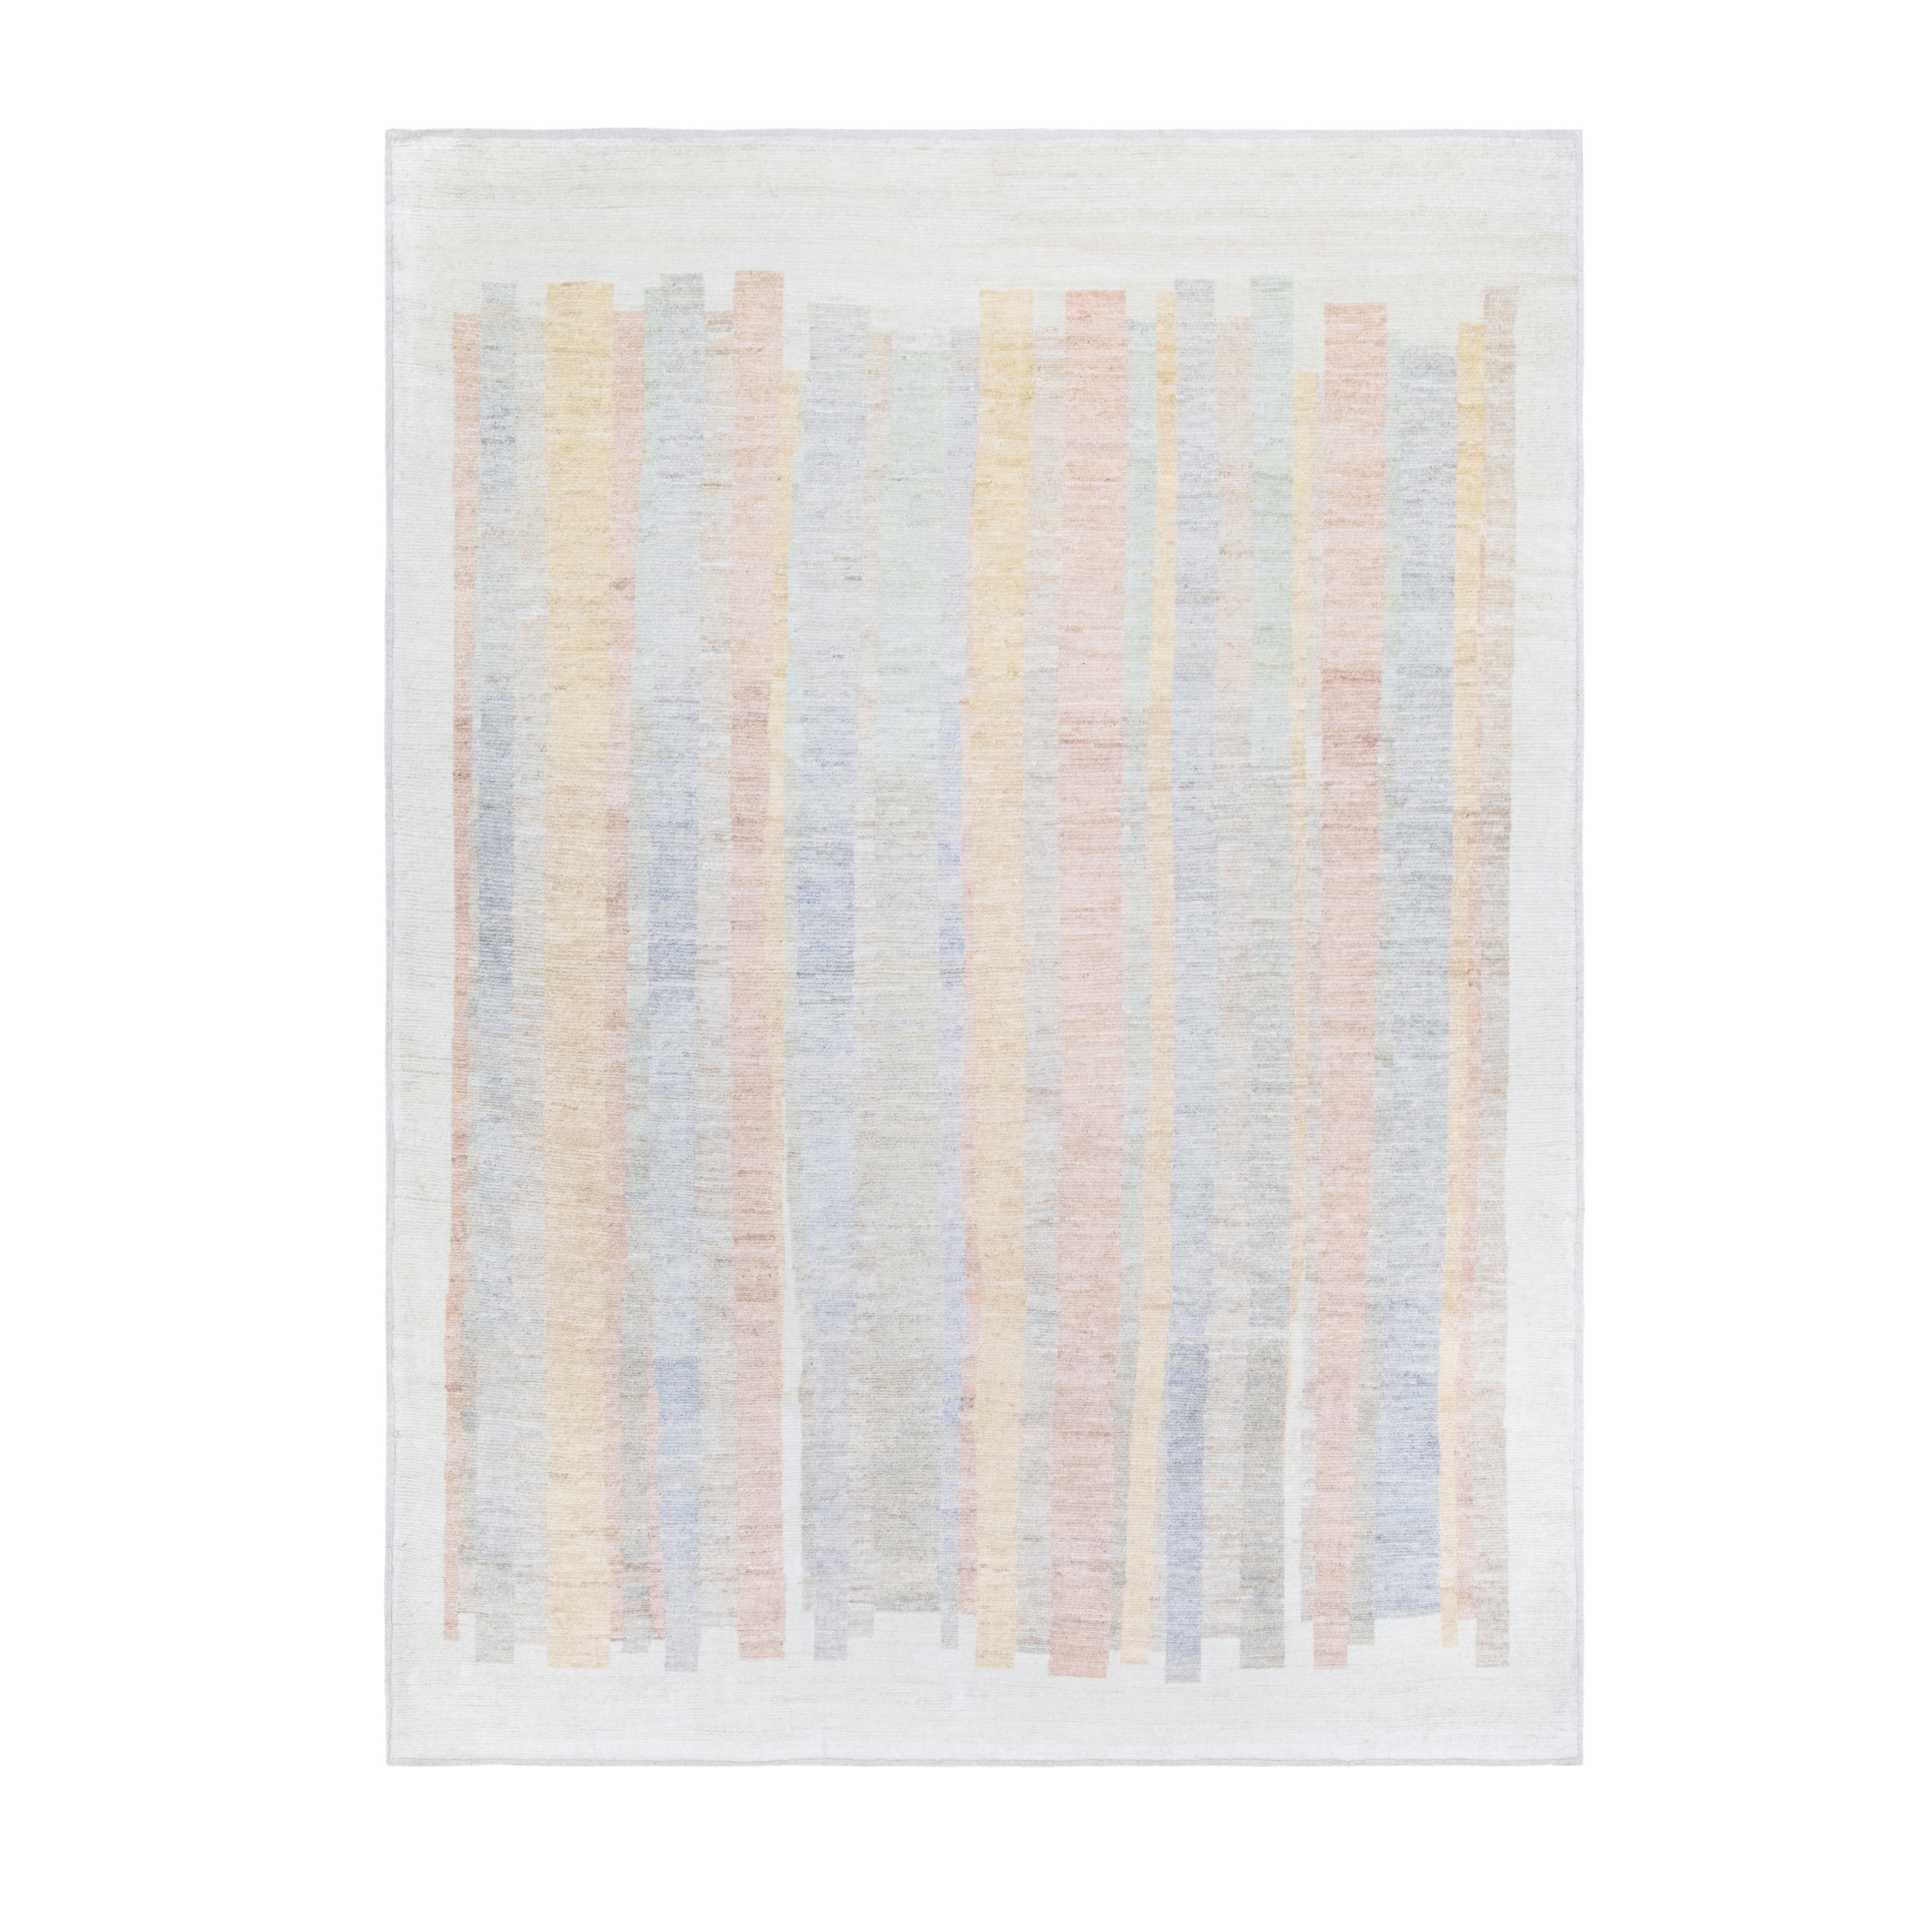 This Olympia rug is hand-knotted and crafted 100% wool.  